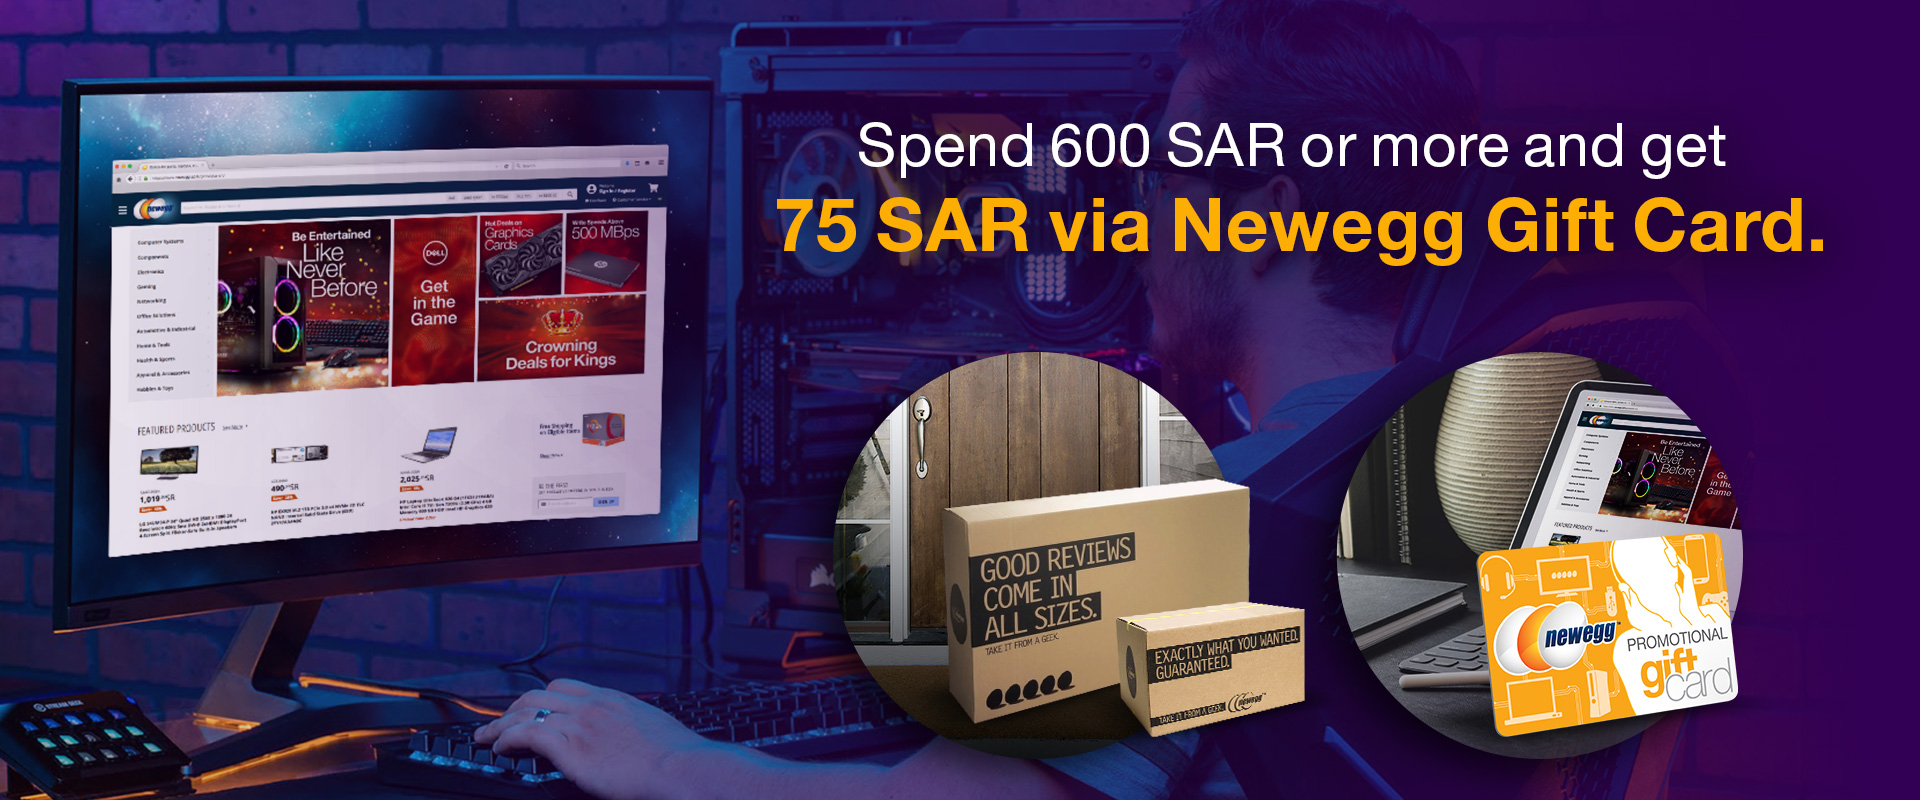 spend-600-sar-or-more-on-eligible-items-and-get-a-75-sar-newegg-gift